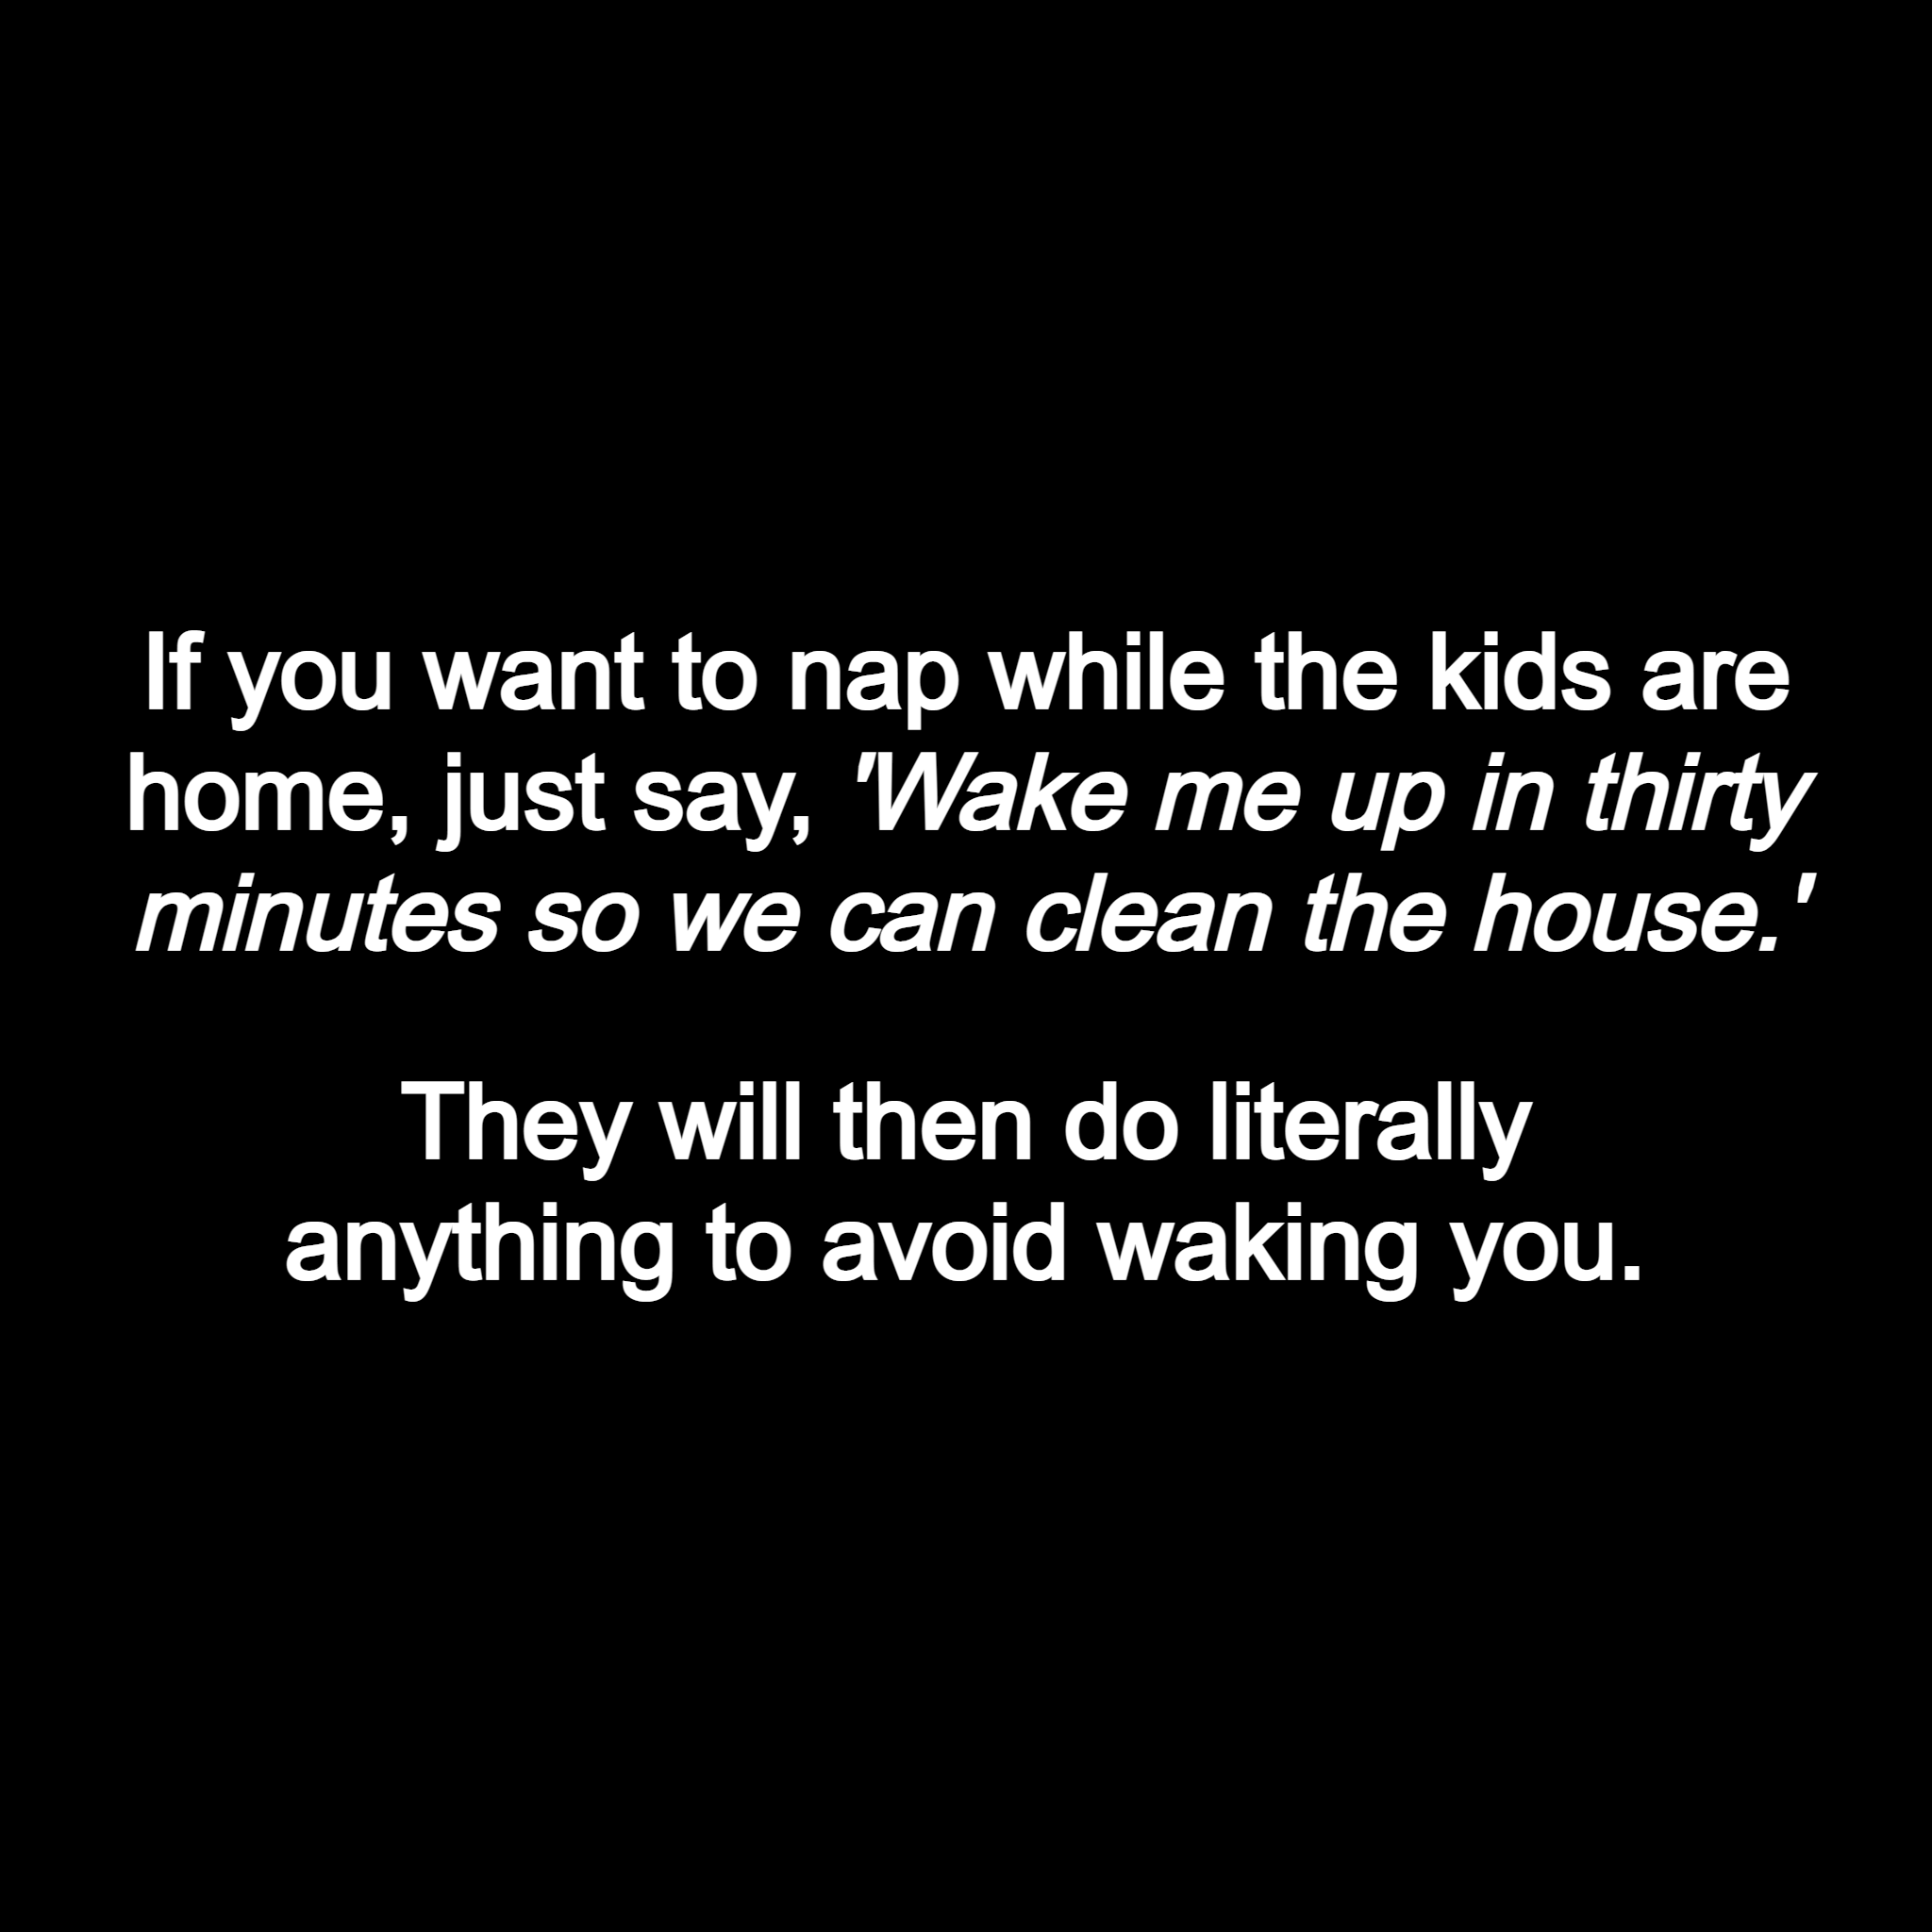 Nap whereas the kids are dwelling.